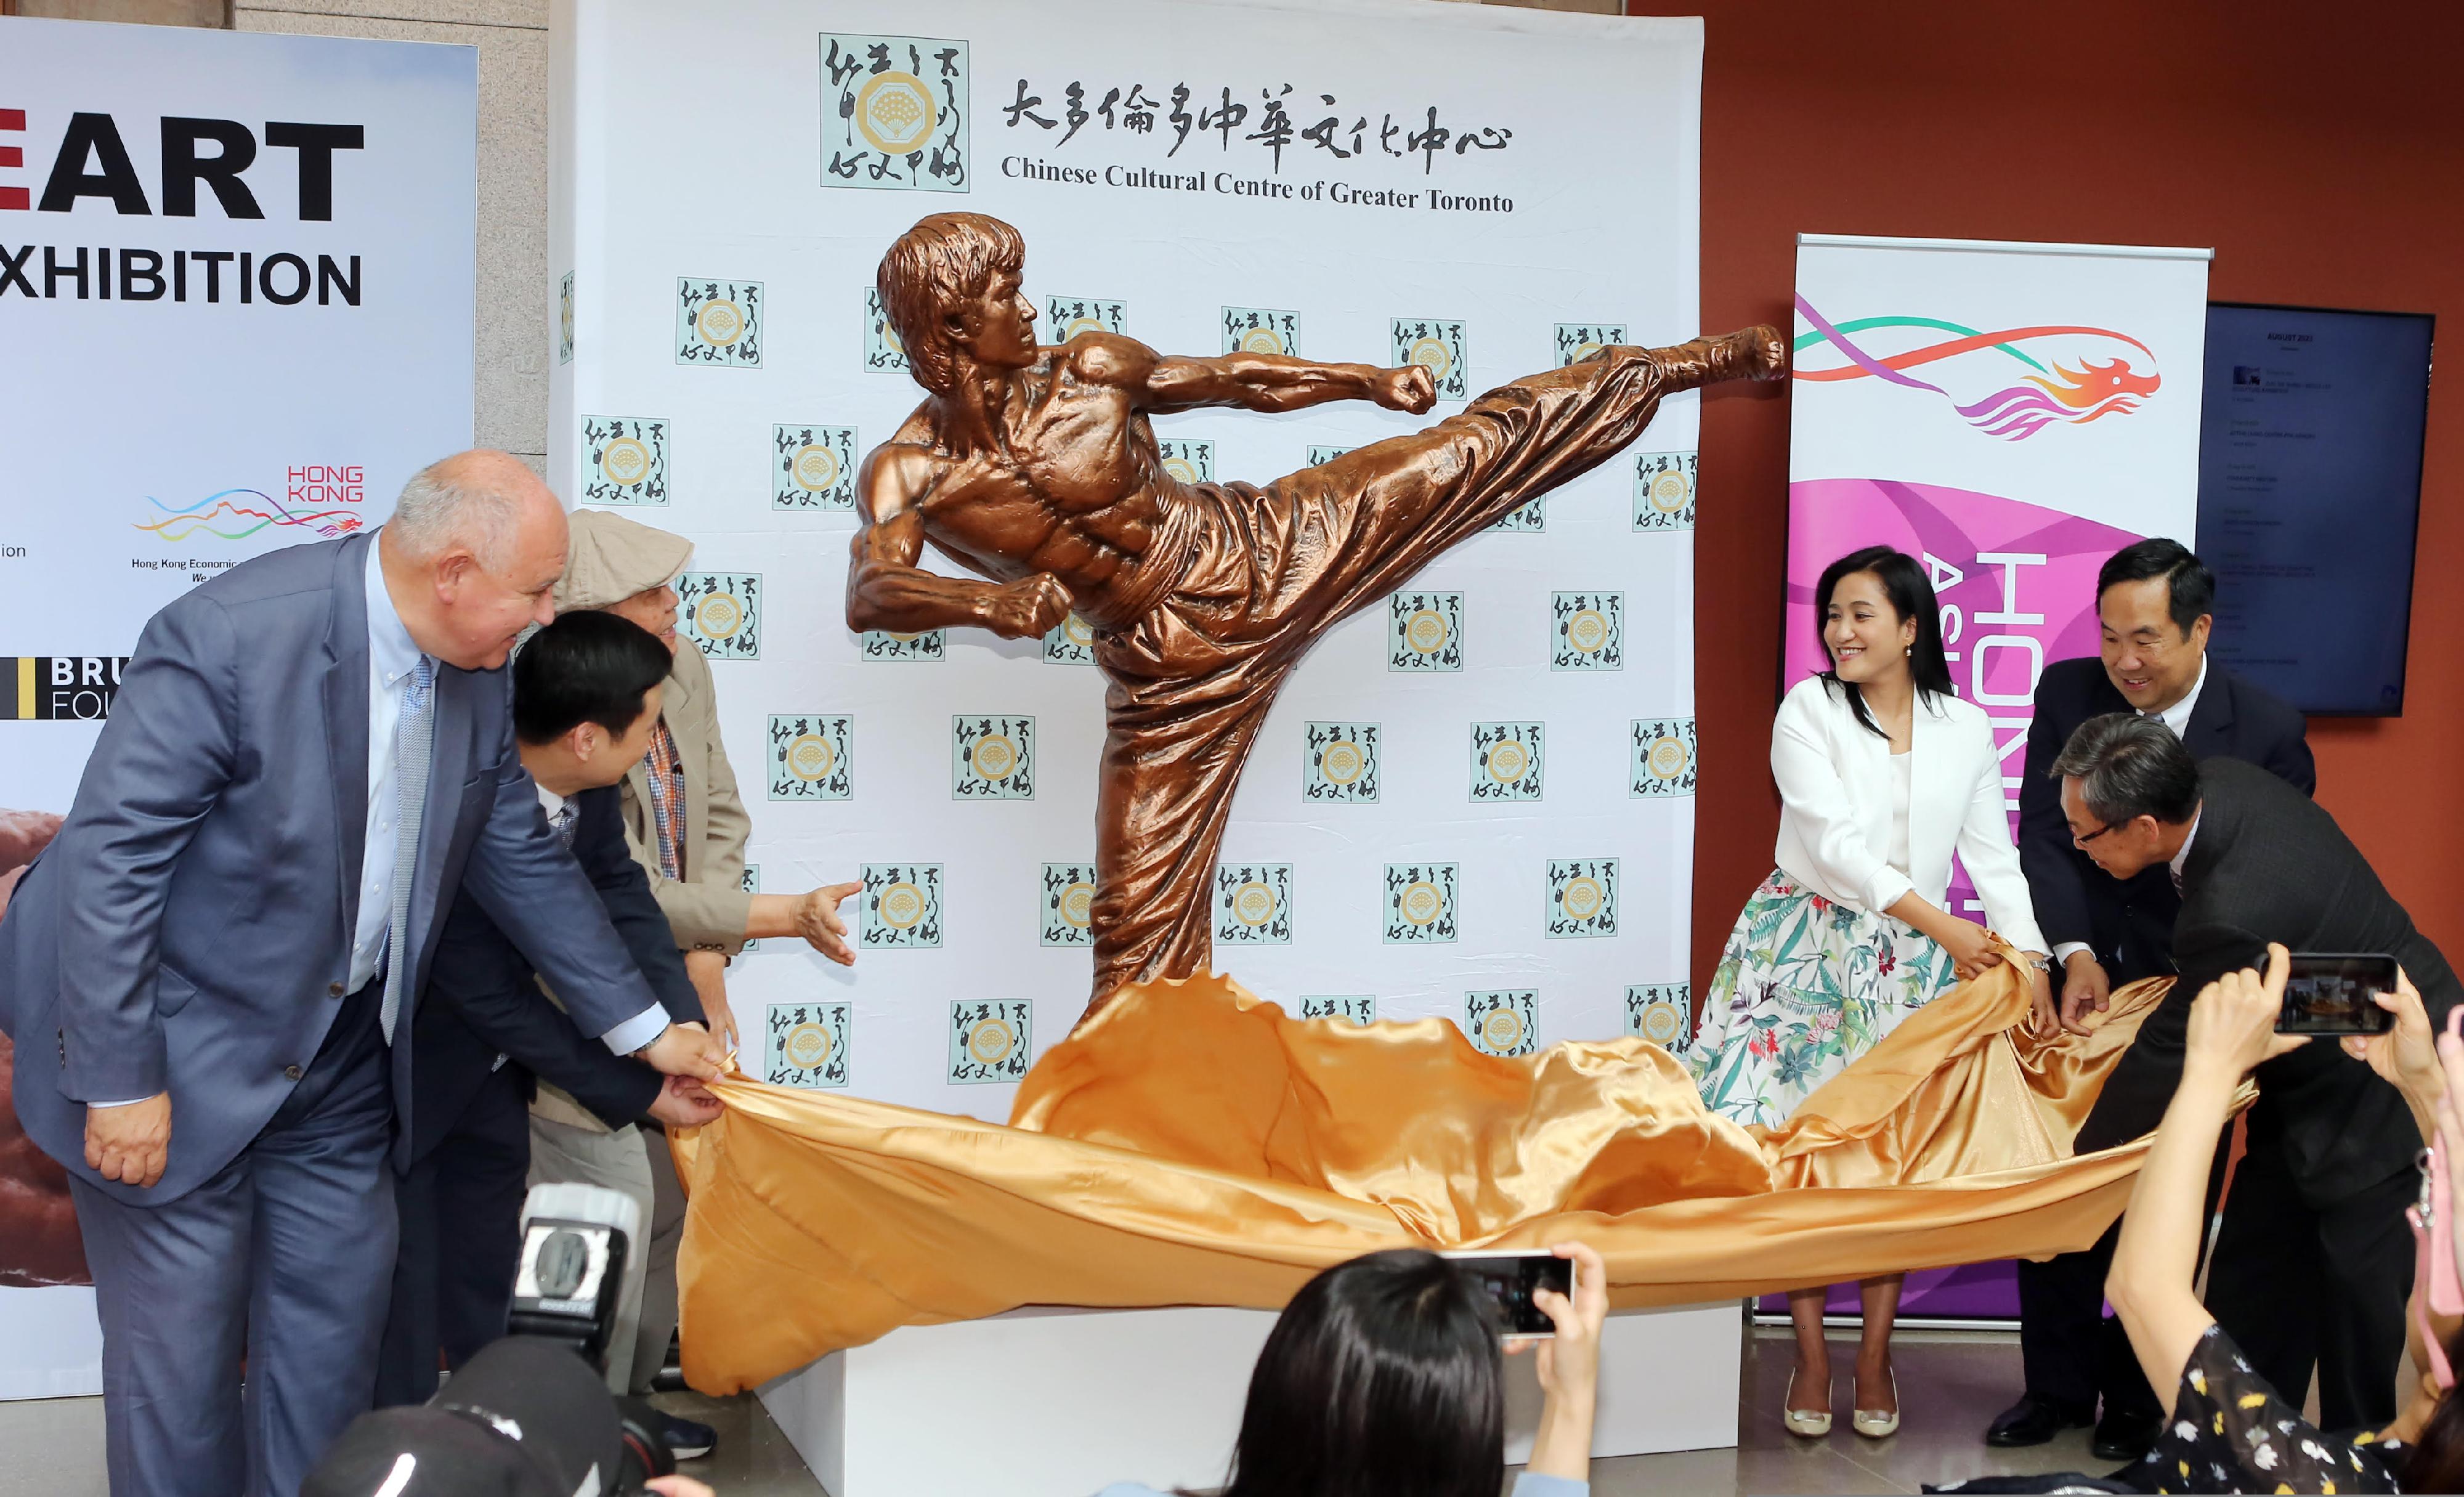 Photo shows the officiating guests unveiling the Bruce Lee sculpture for the opening of "Art at Heart - Chu Tat Shing Art Exhibition".